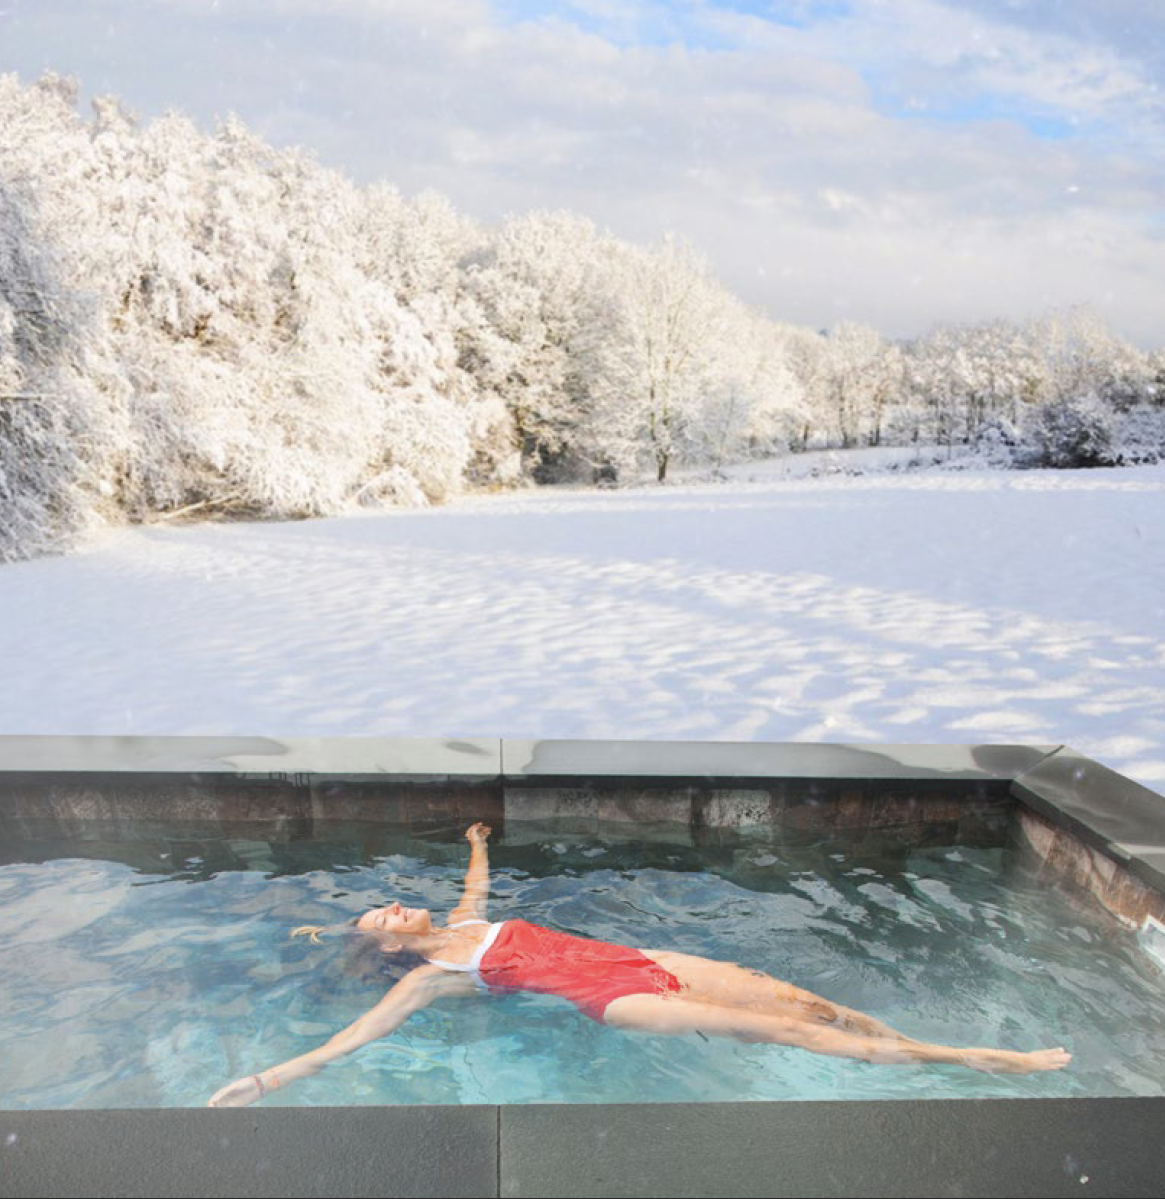 Woman floating in cocktail pool in the winter with snow on the ground